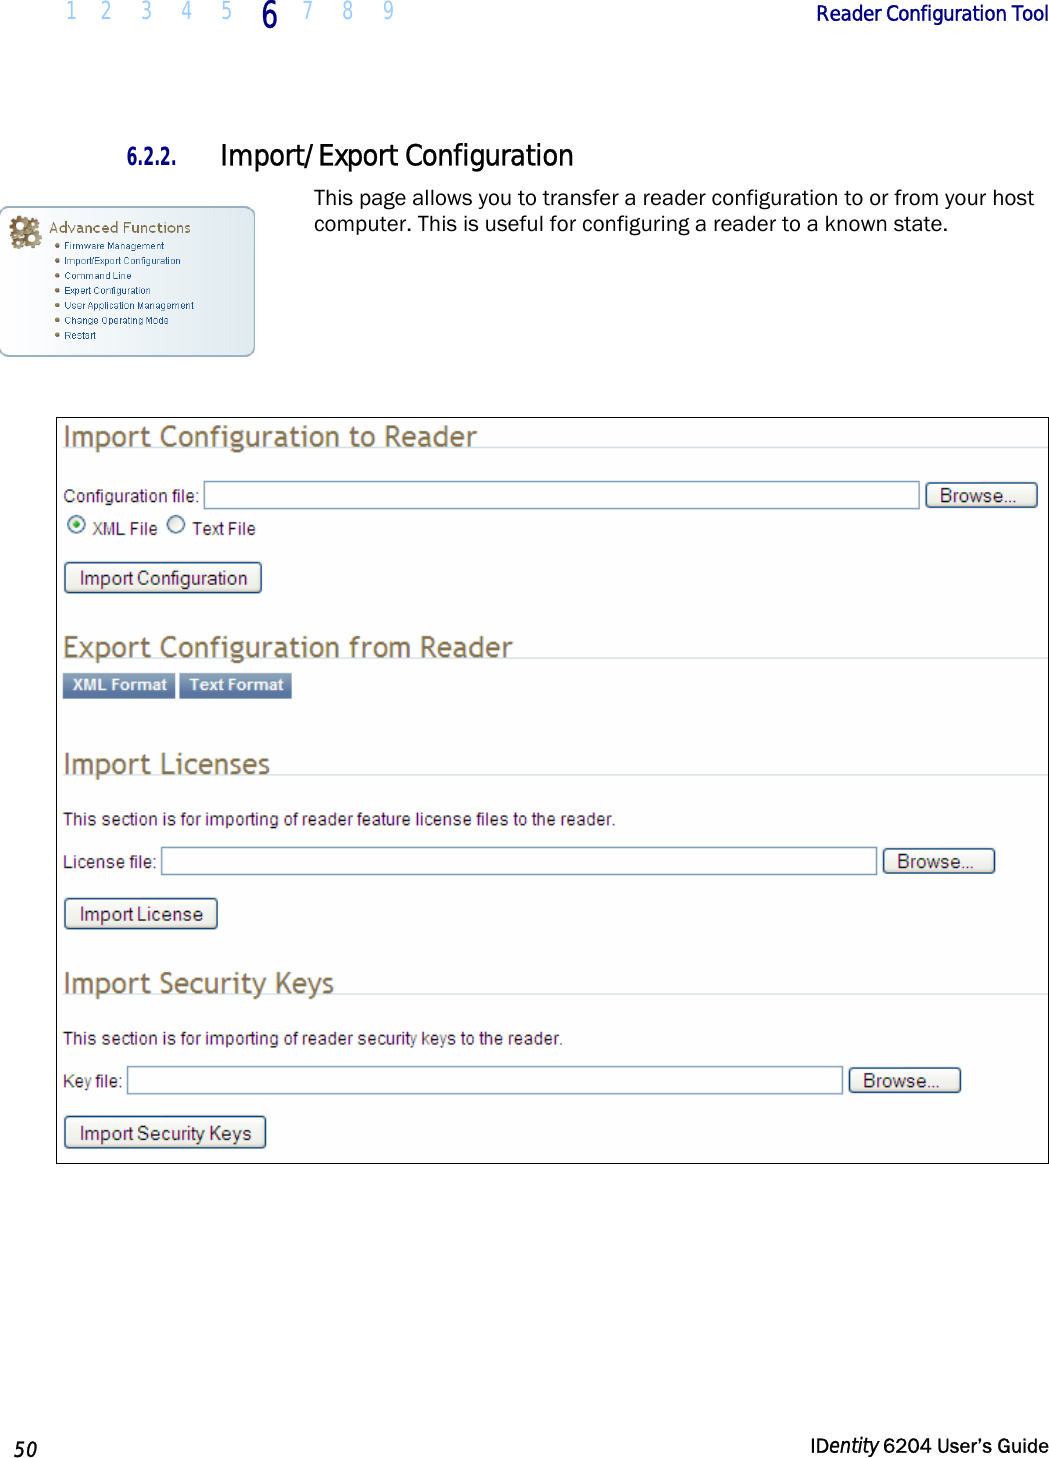  1 2  3  4 5  6  7 8 9        Reader Configuration Tool   50   IDentity 6204 User’s Guide  6.2.2. Import/Export Configuration This page allows you to transfer a reader configuration to or from your host computer. This is useful for configuring a reader to a known state.      